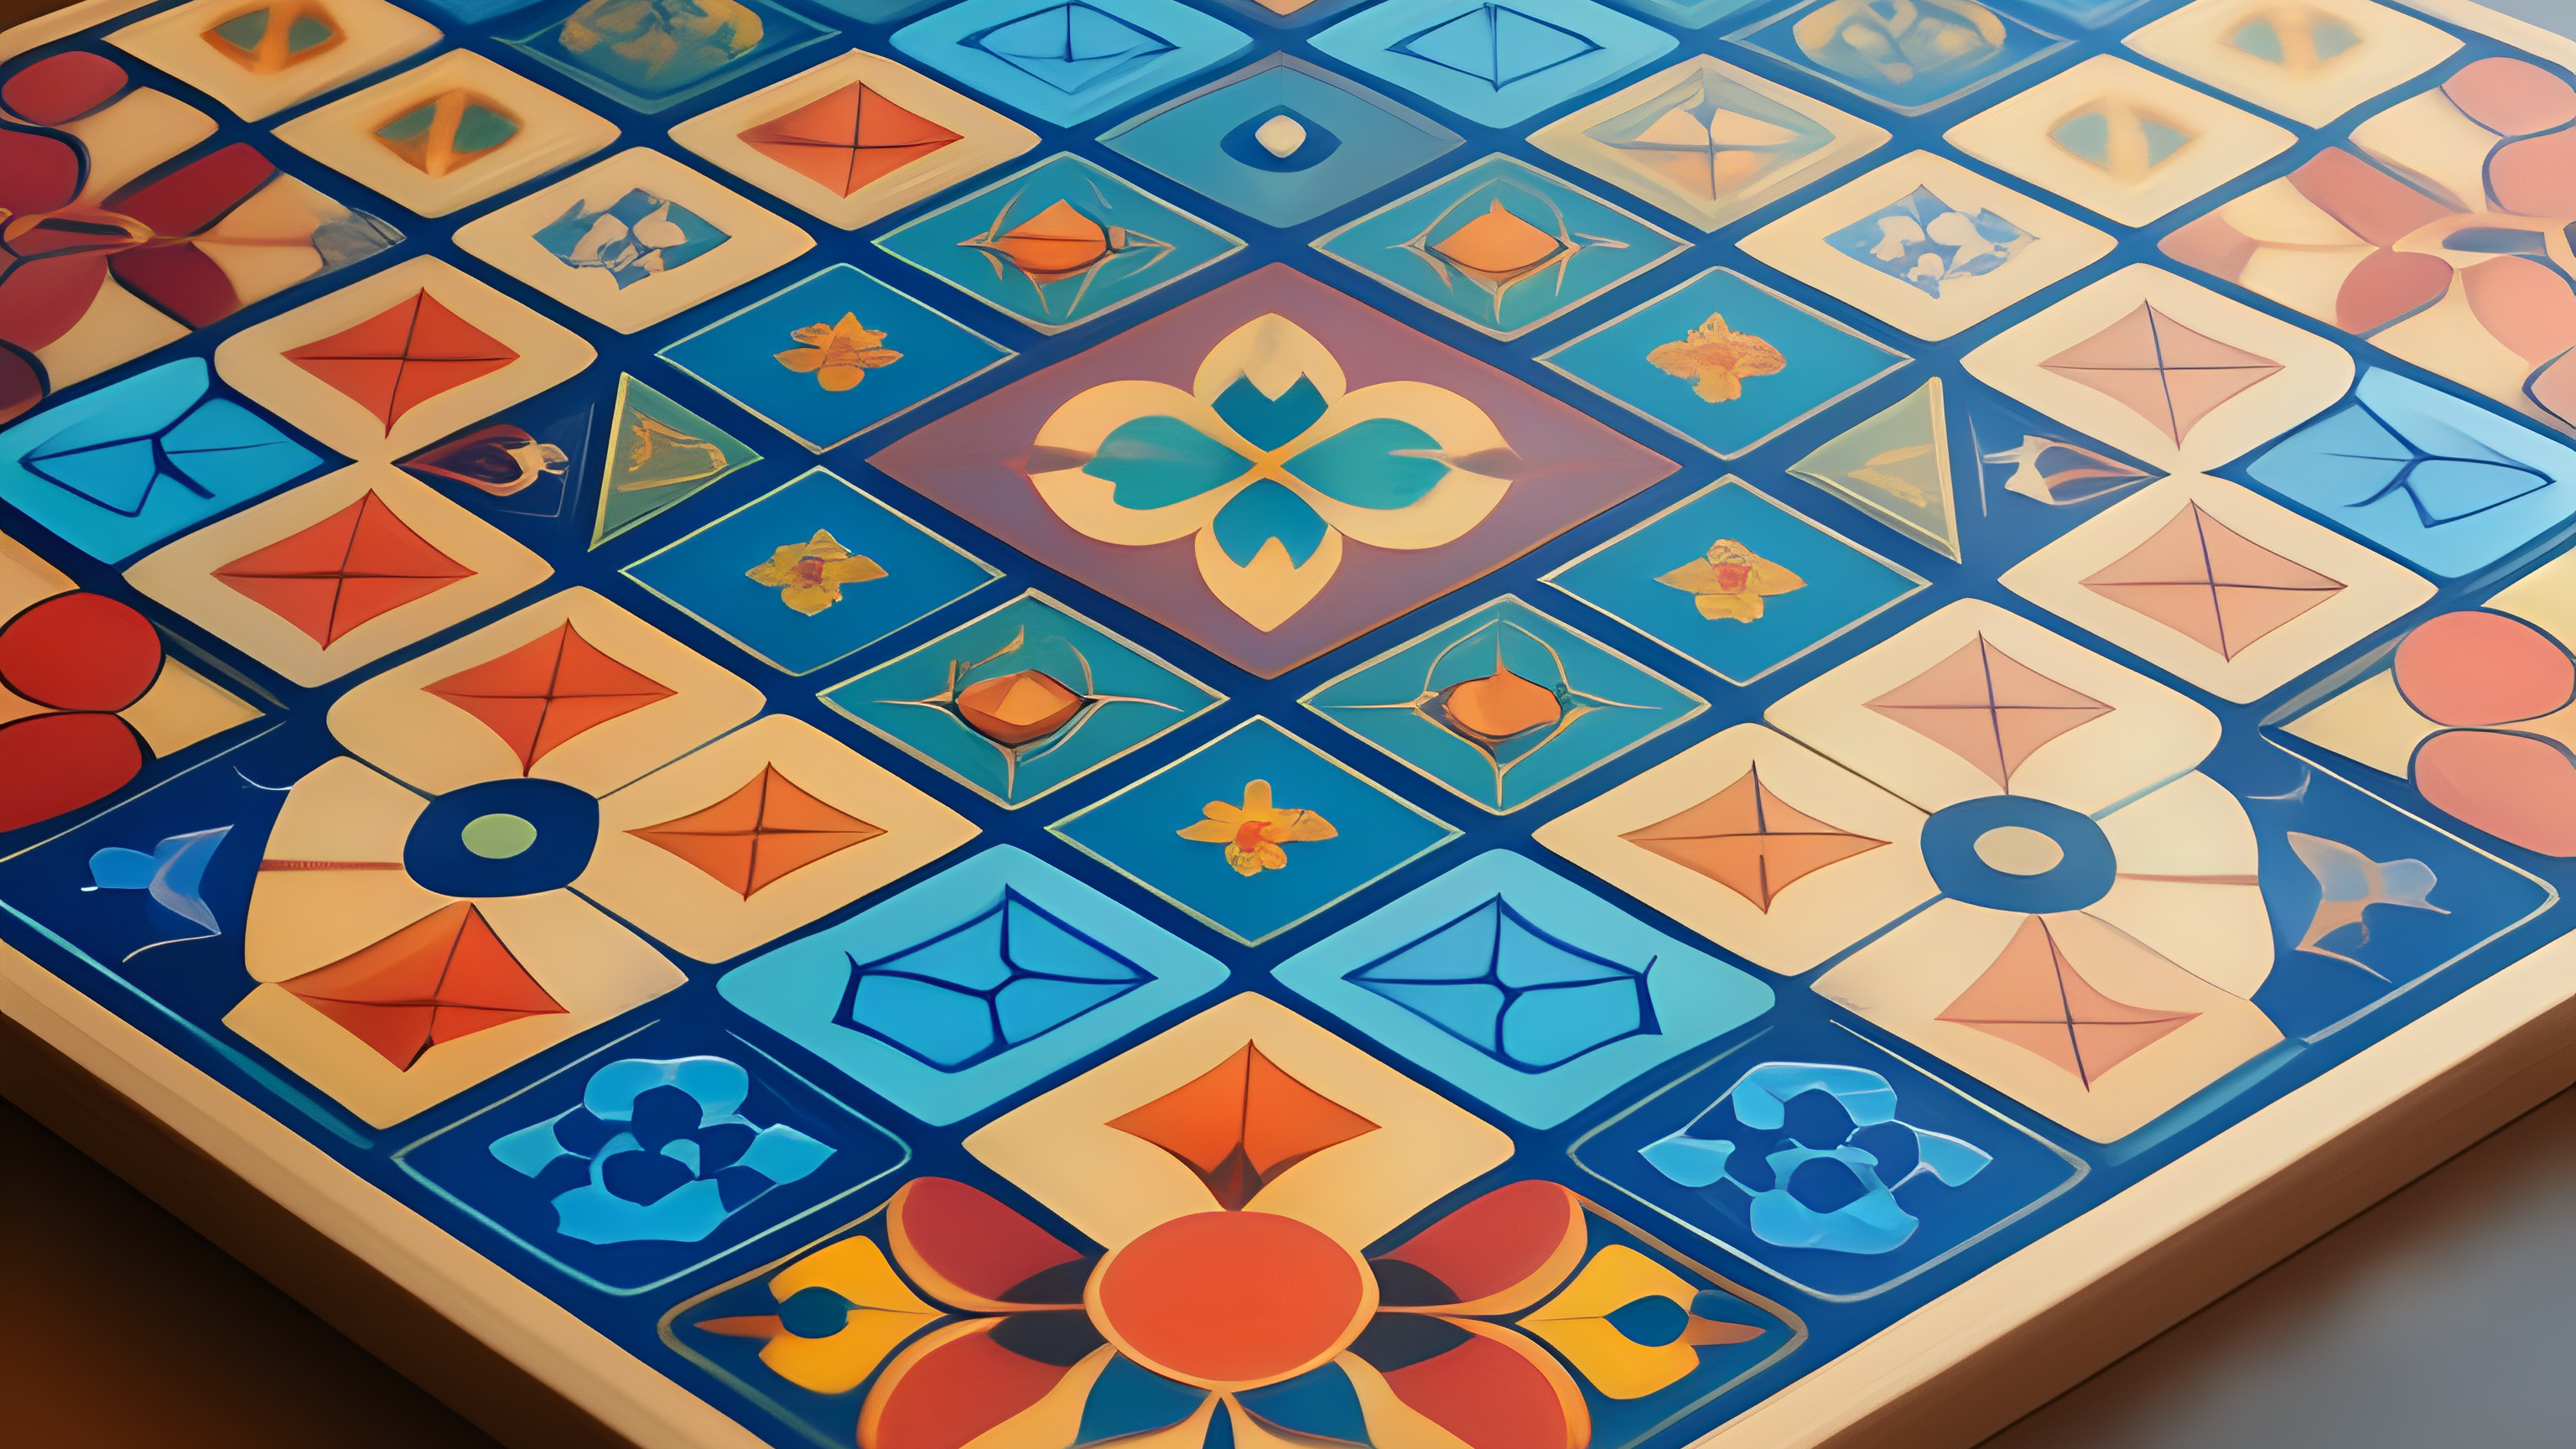 Azul, strategic placement, pattern building, tile drafting, scoring system